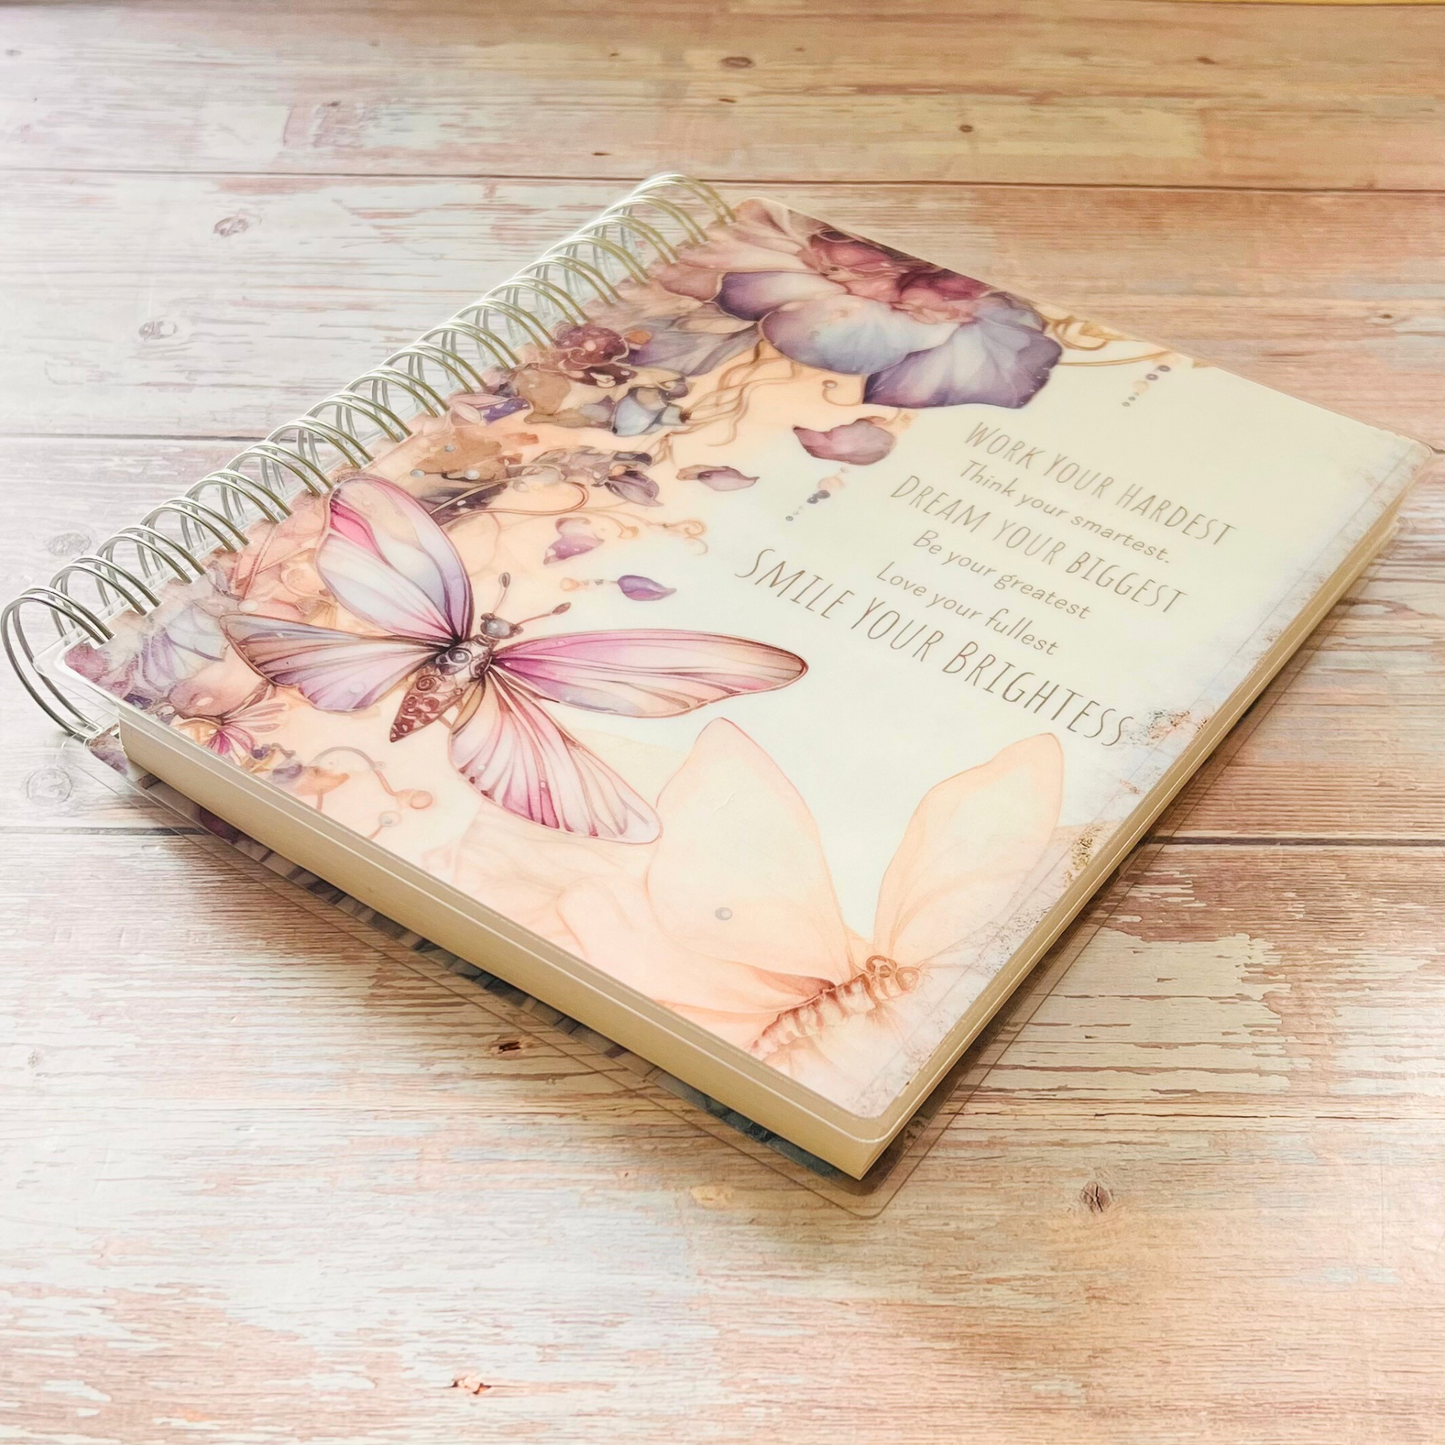 Personalized 6 Month Daily Planner | Work Your Hardest